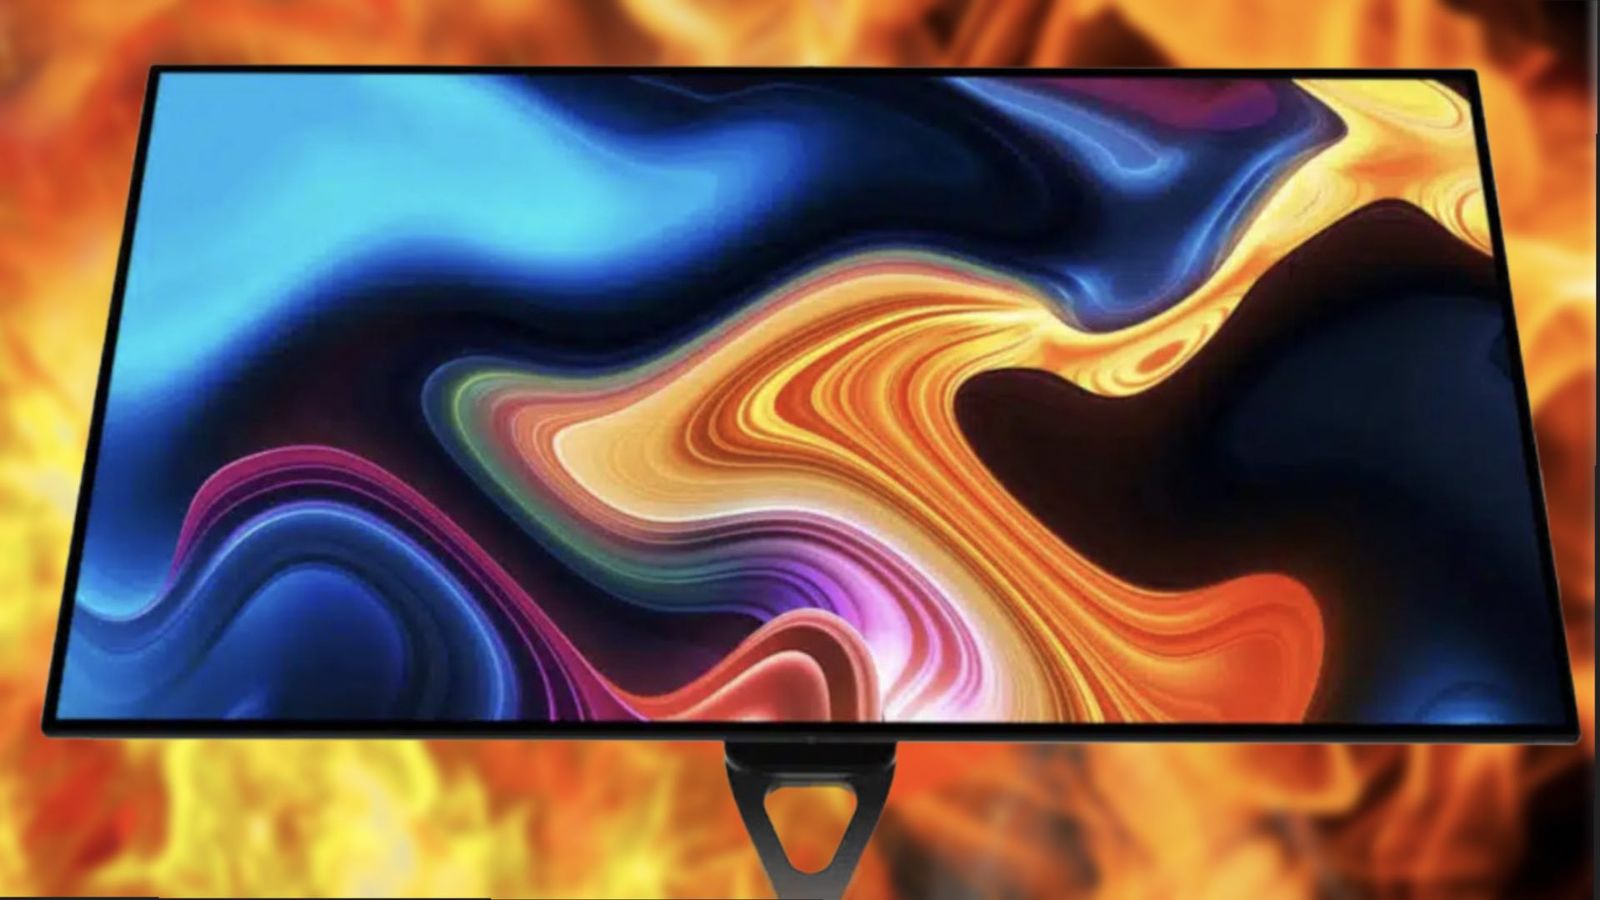 Dough Spectrum 32-inch 4K OLED Gaming Monitor on a flaming background 